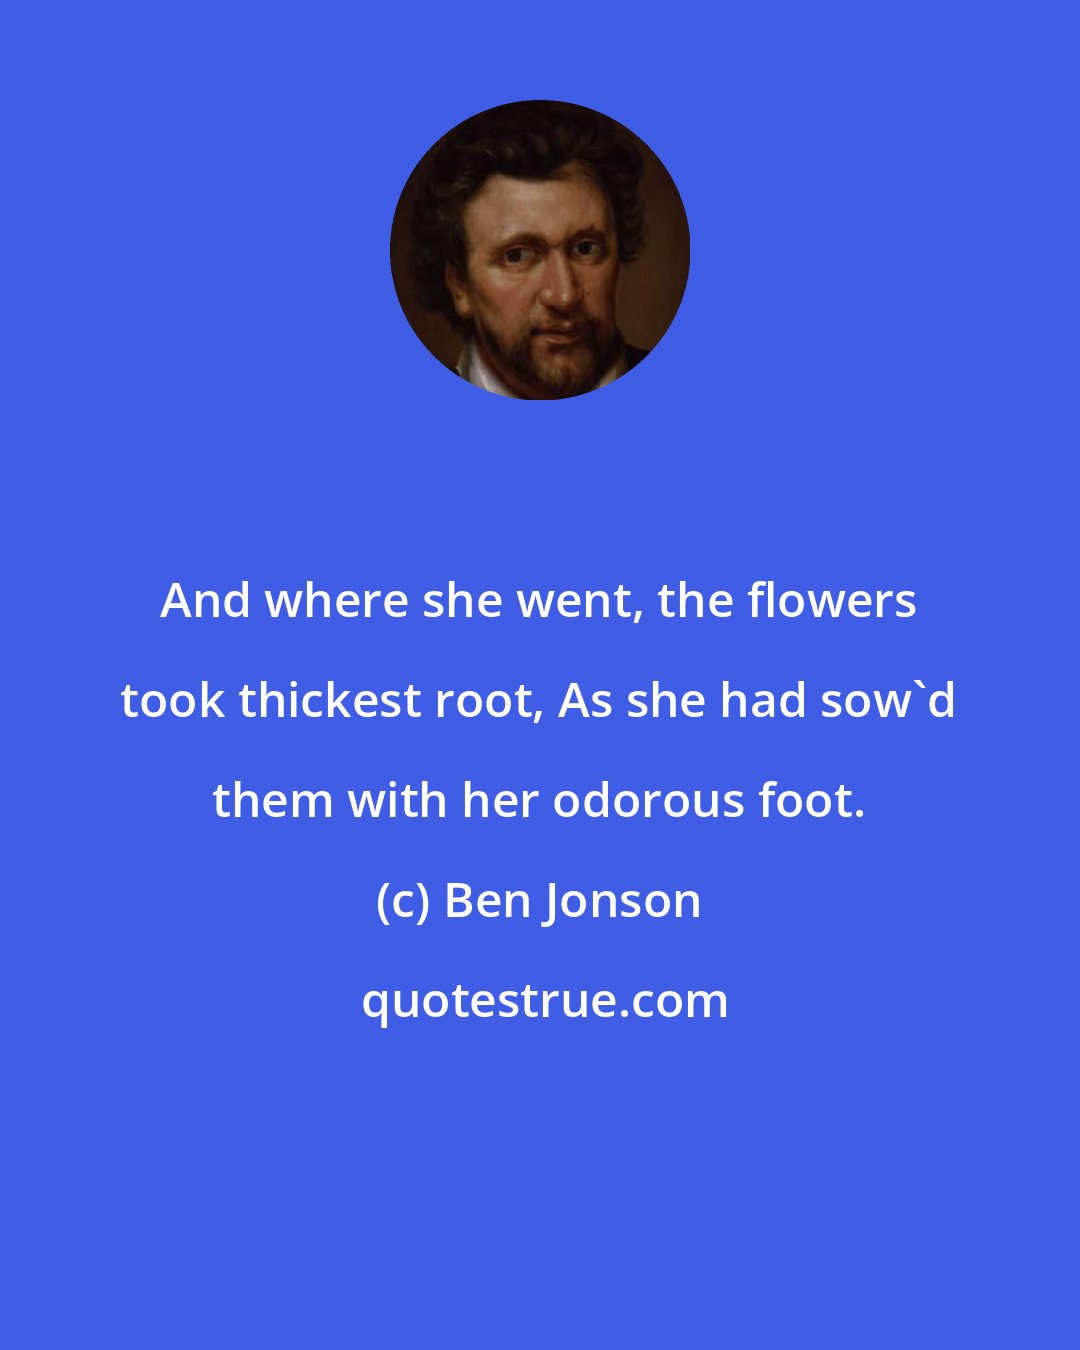 Ben Jonson: And where she went, the flowers took thickest root, As she had sow'd them with her odorous foot.